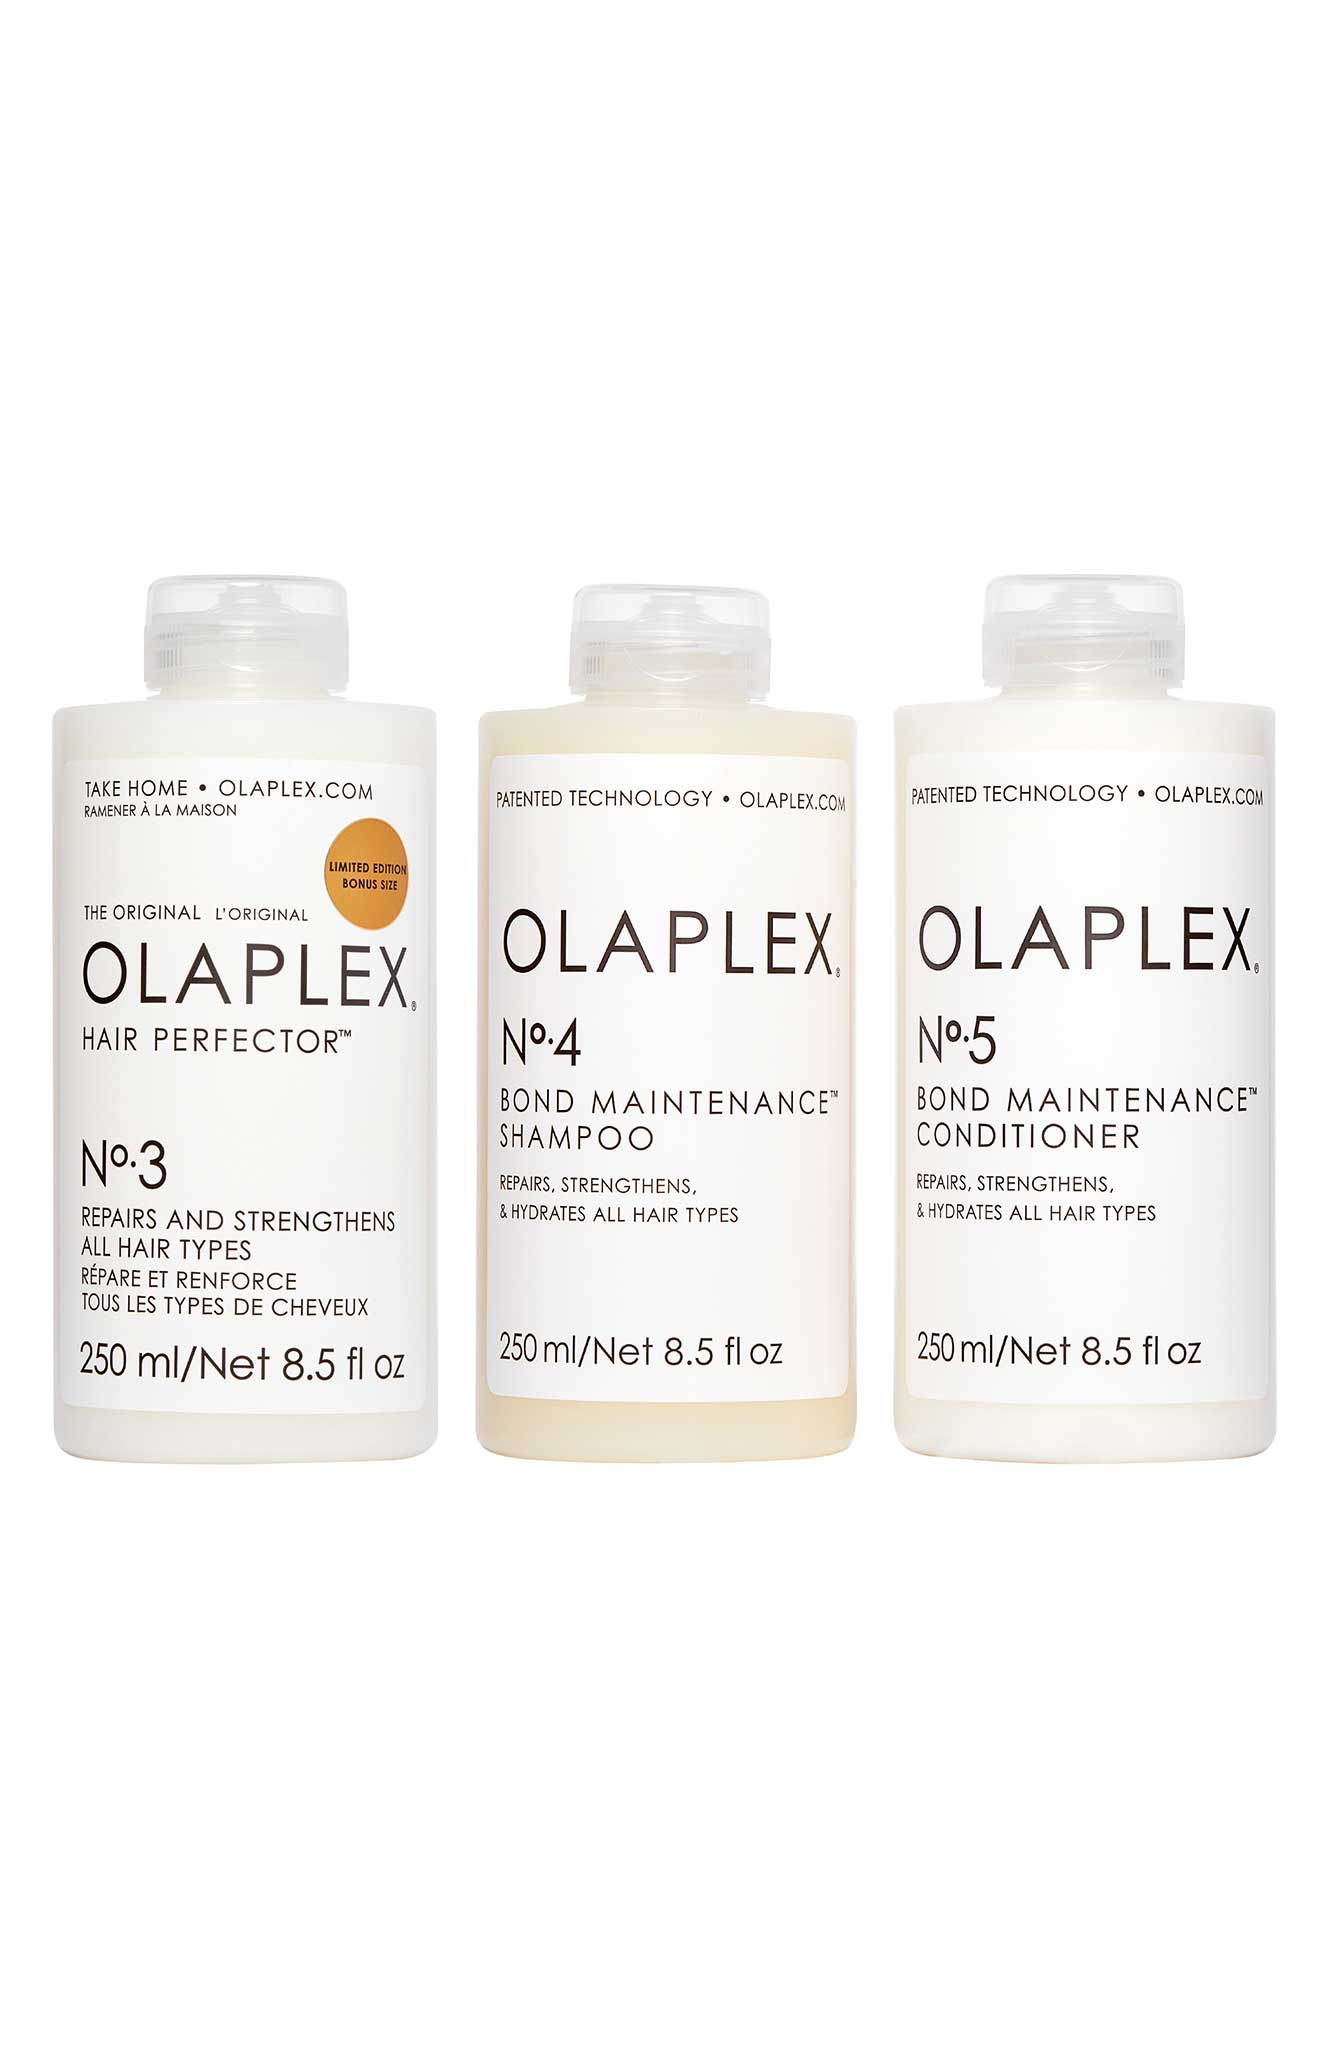 Olaplex Strength & Protect Set: Olaplex products have been life-changing for my hair! The set includes a jumbo size of the #3 Hair Perfector Treatment that will strengthen and restore your hair’s natural appearance and smooth texture.